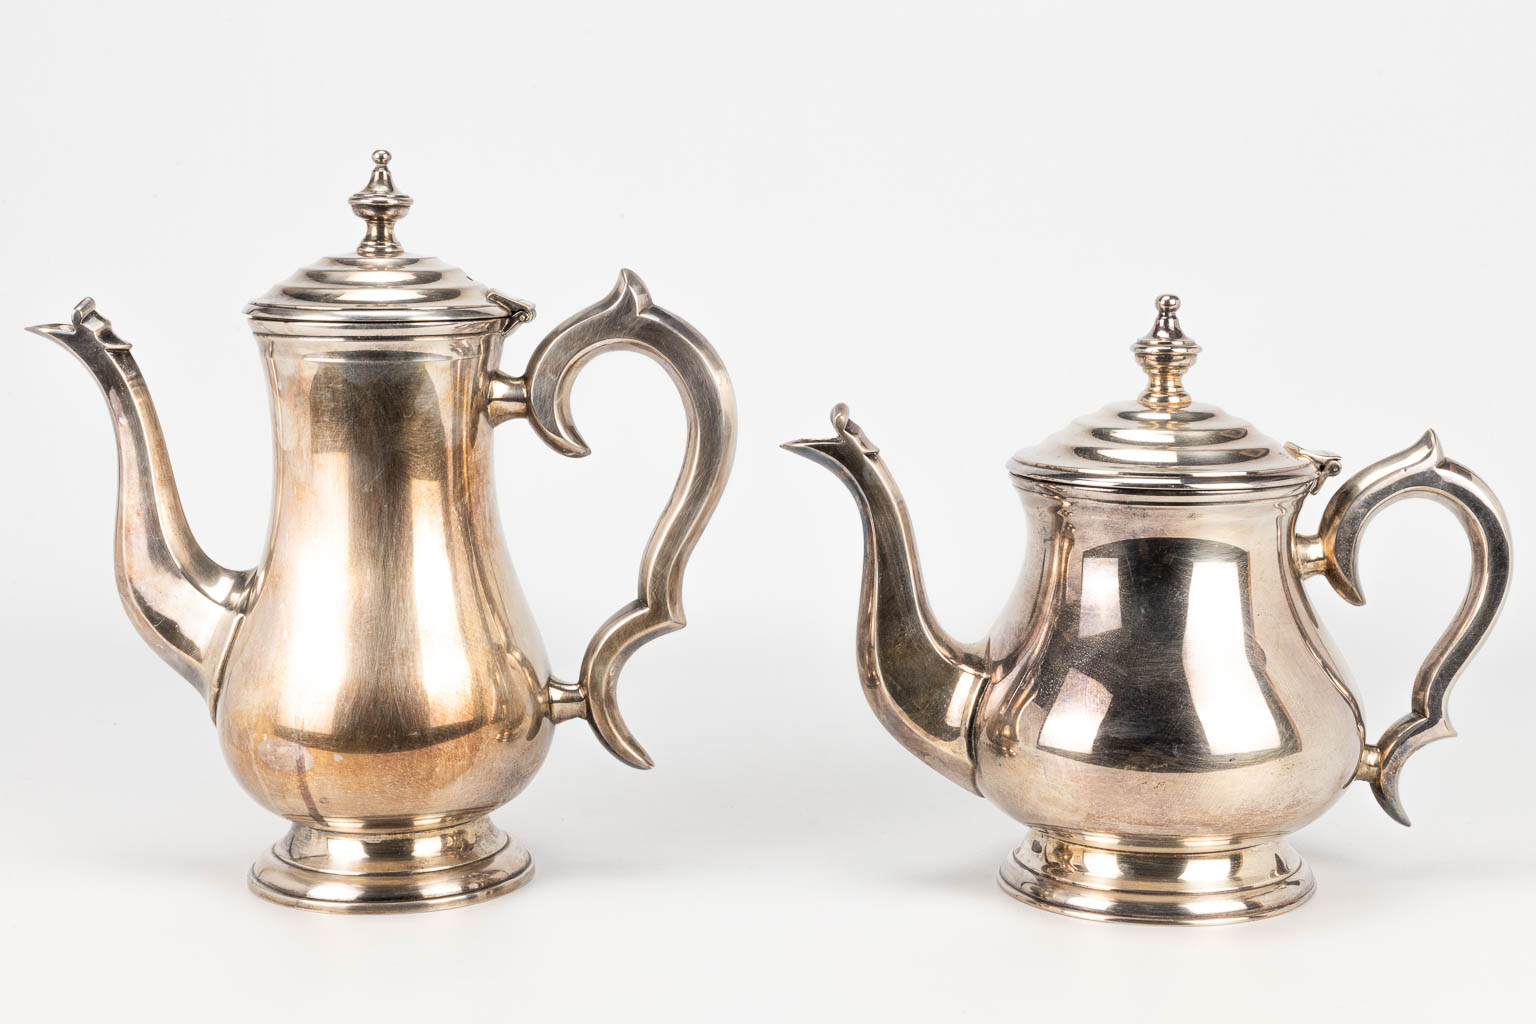 A coffee and tea service made of silver-plated metal. 